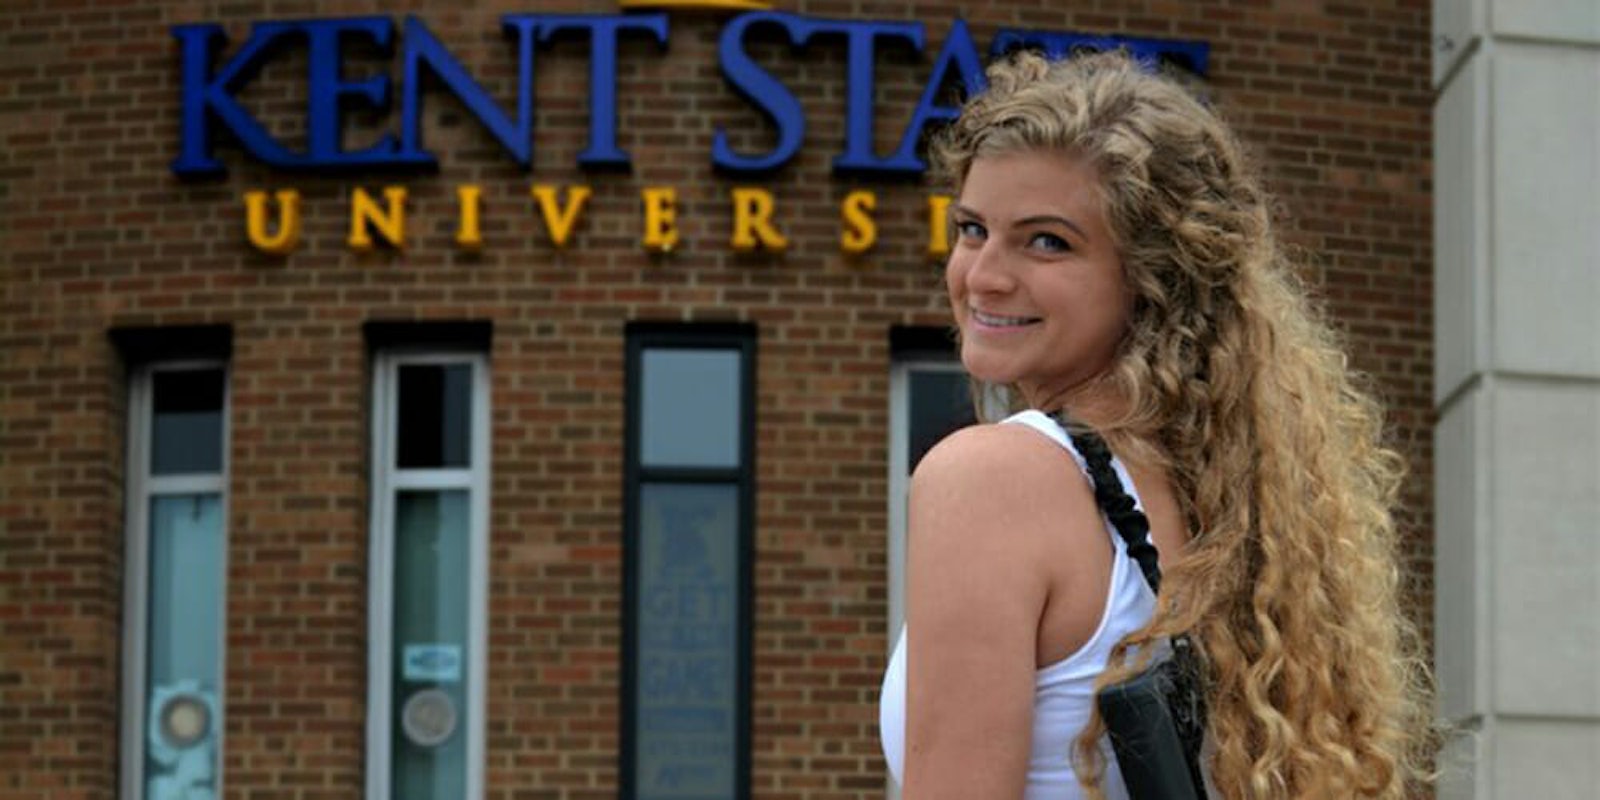 Kent State graduate Kaitlin Bennett came under fire for posing on campus with an assault rifle, and now she's claiming to be a victim of 'blatant racism.'